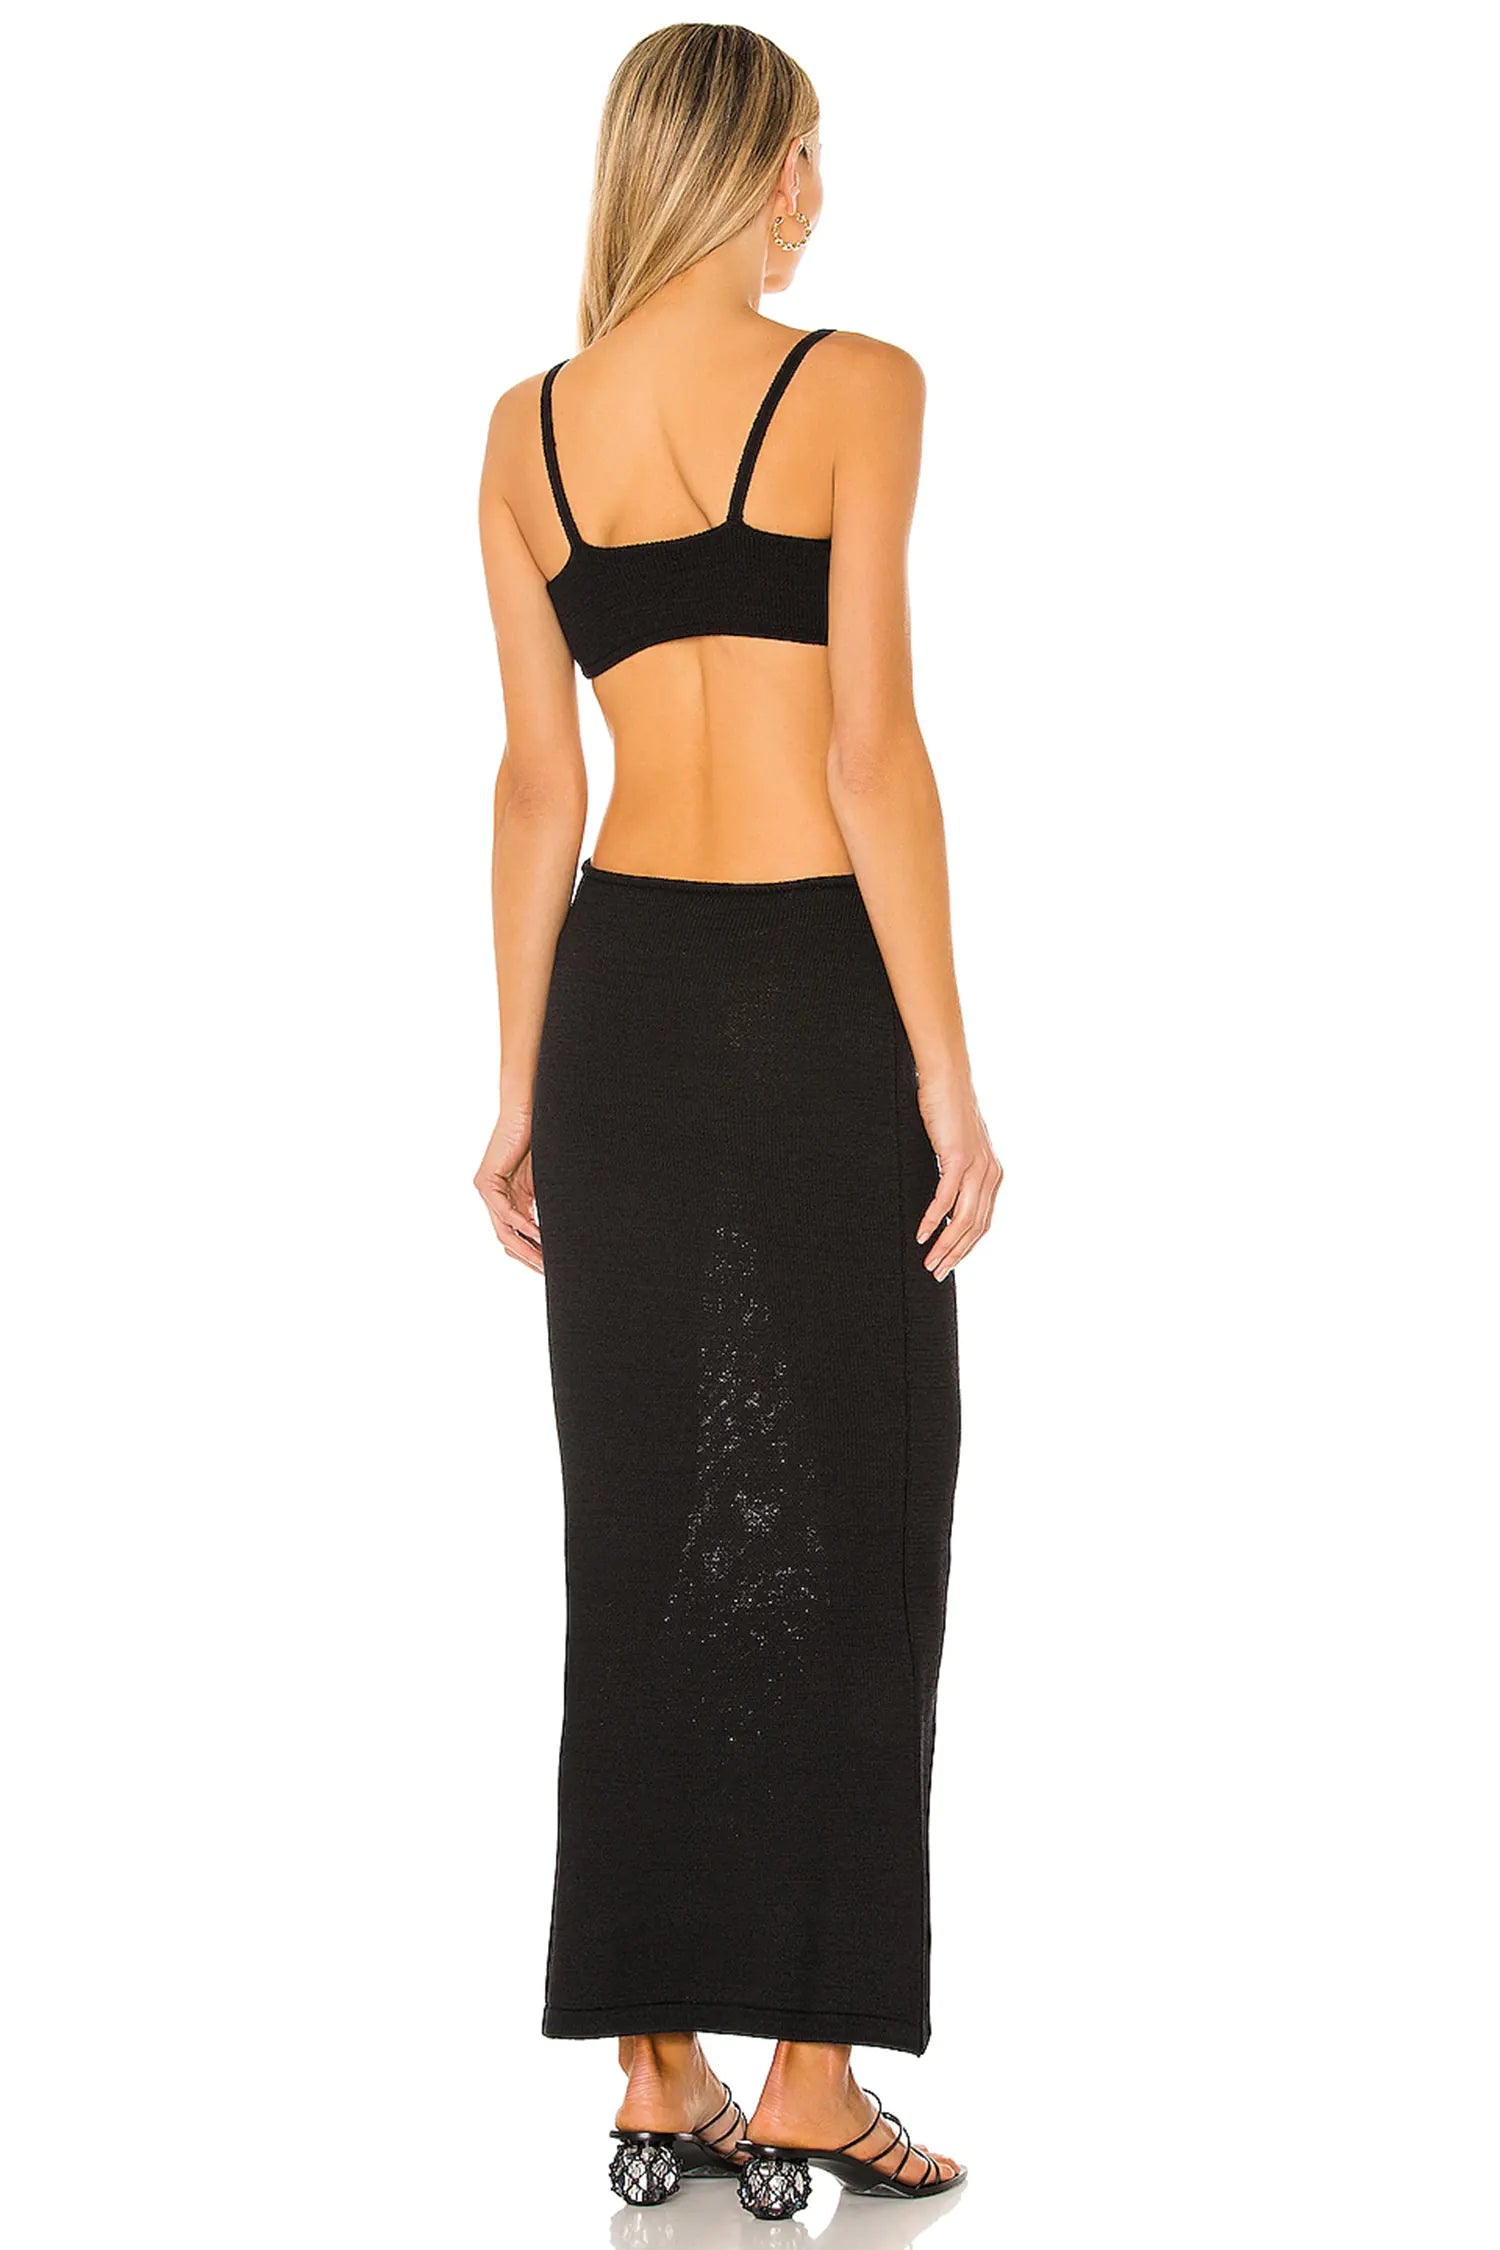 Black Front Tie Cut Out Backless Knitted Maxi Dress